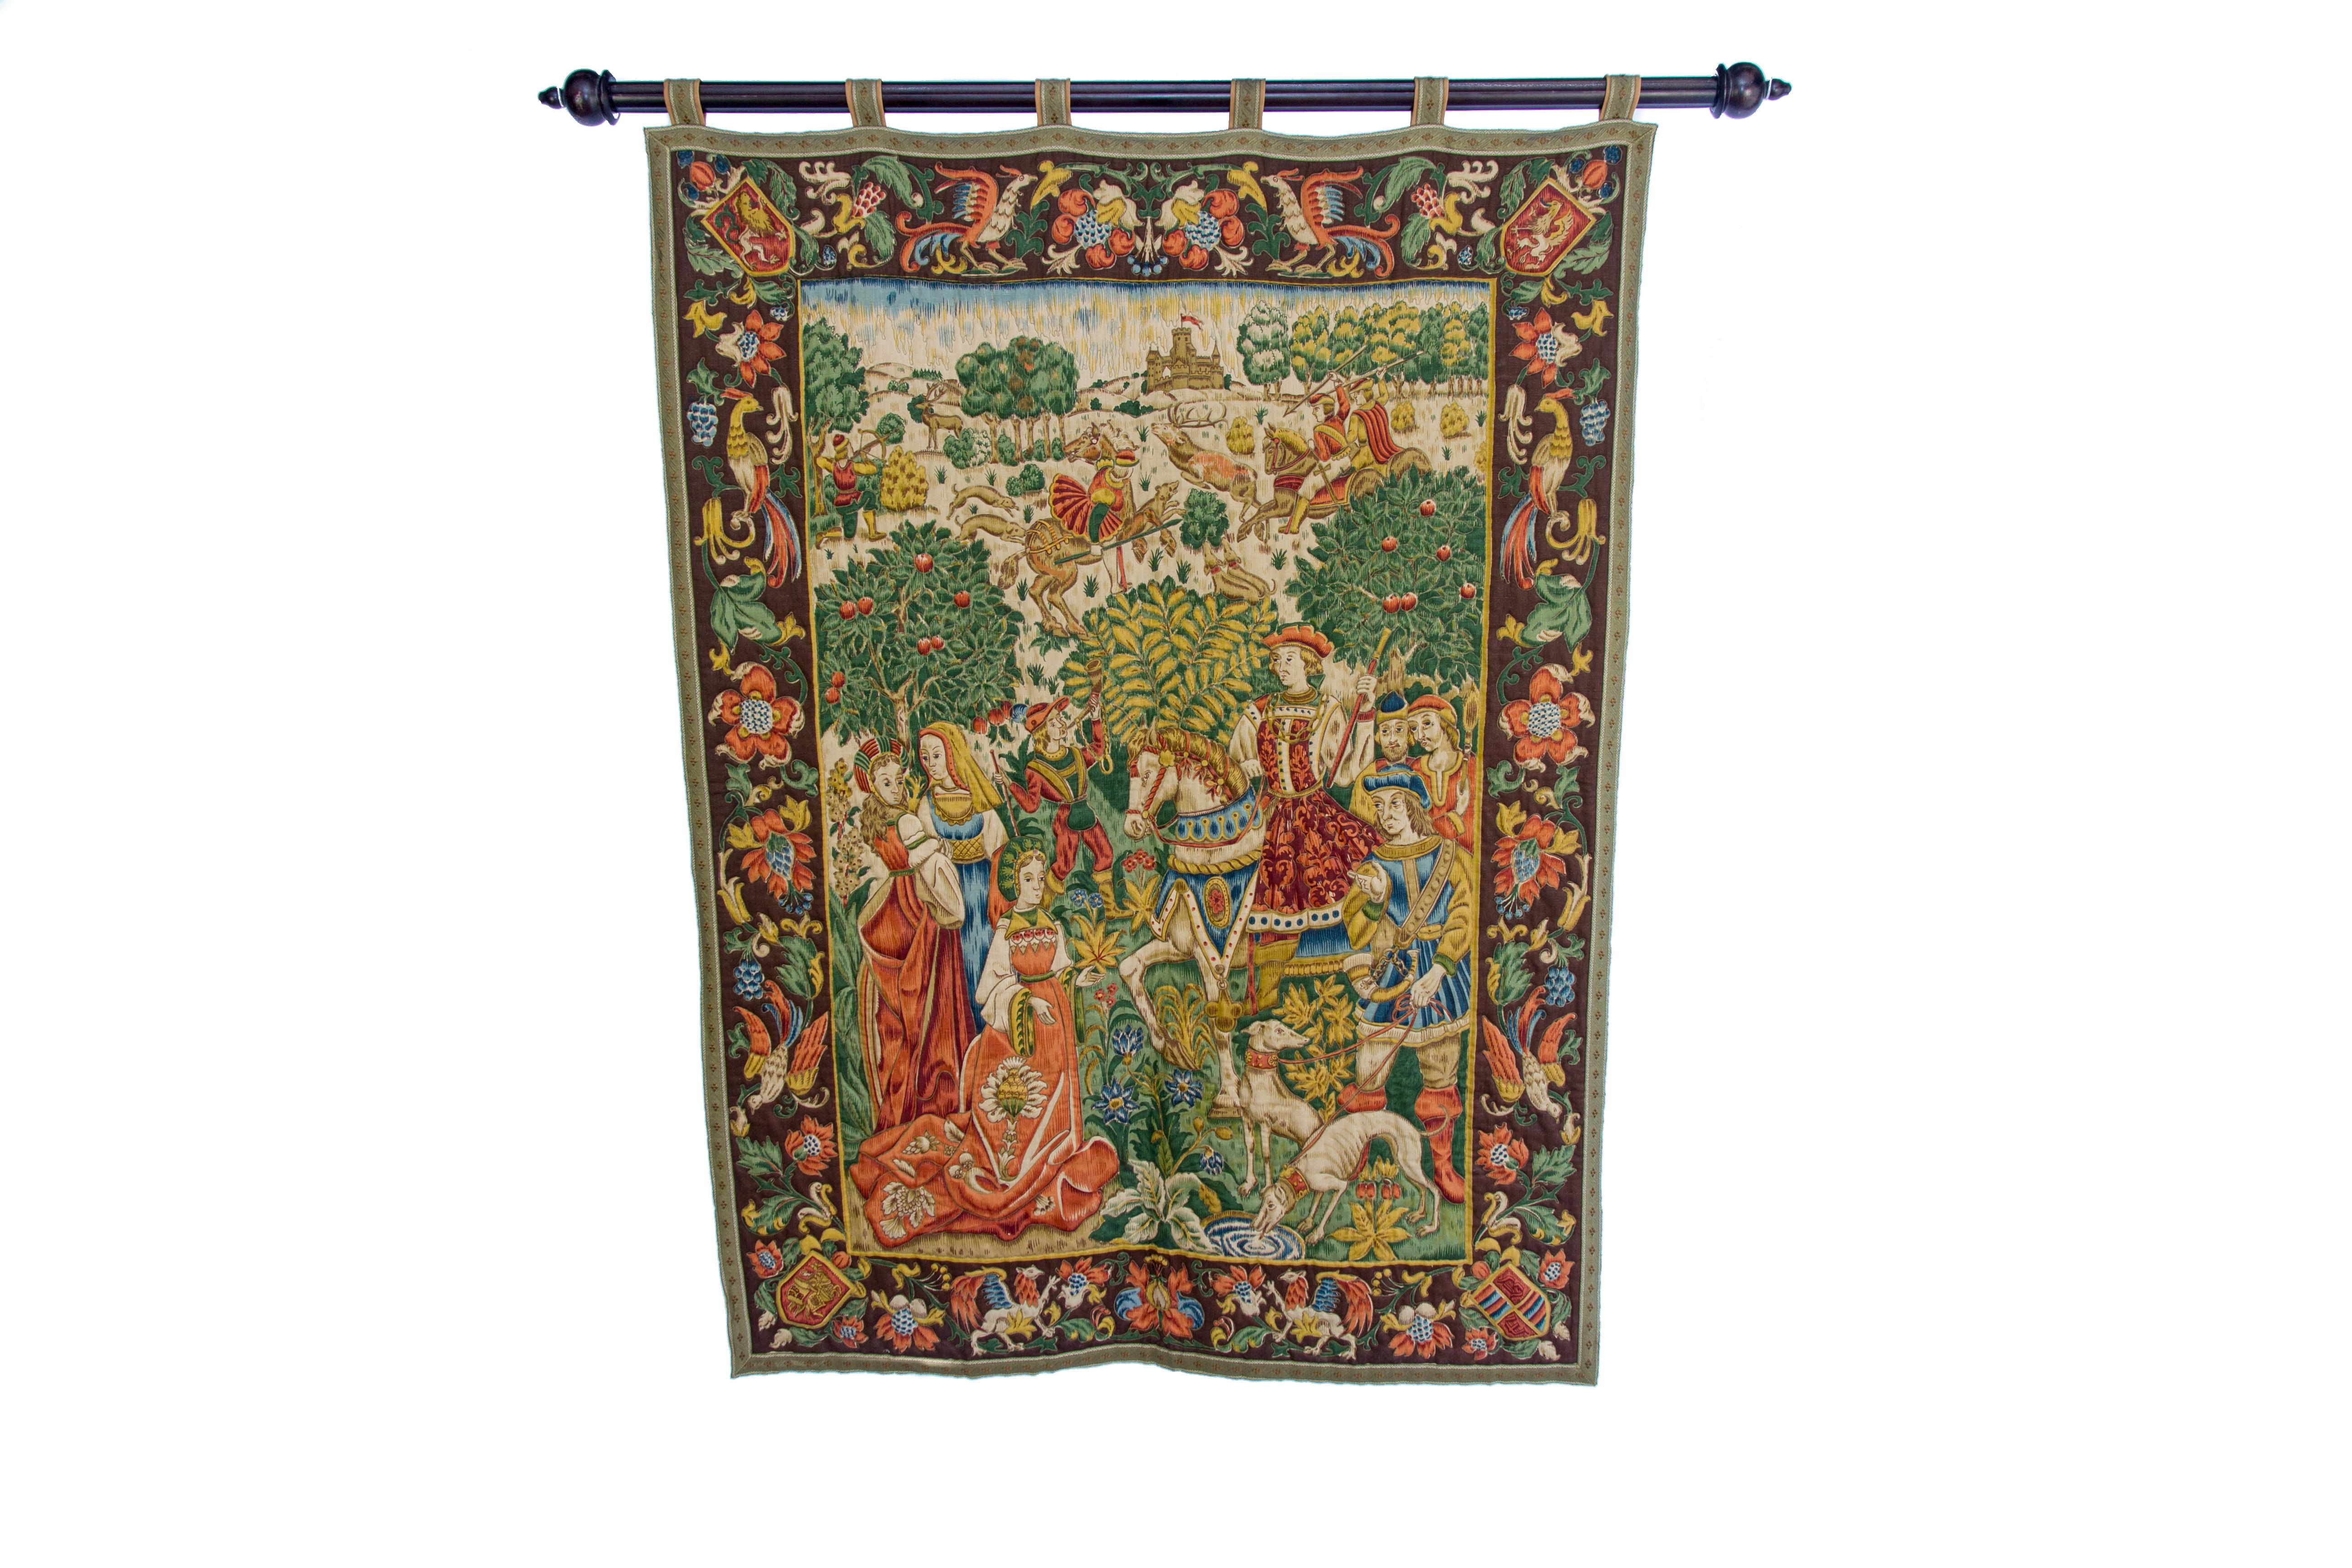 20th Century Large Tapestry Wall Hanging Decor Medieval Scene